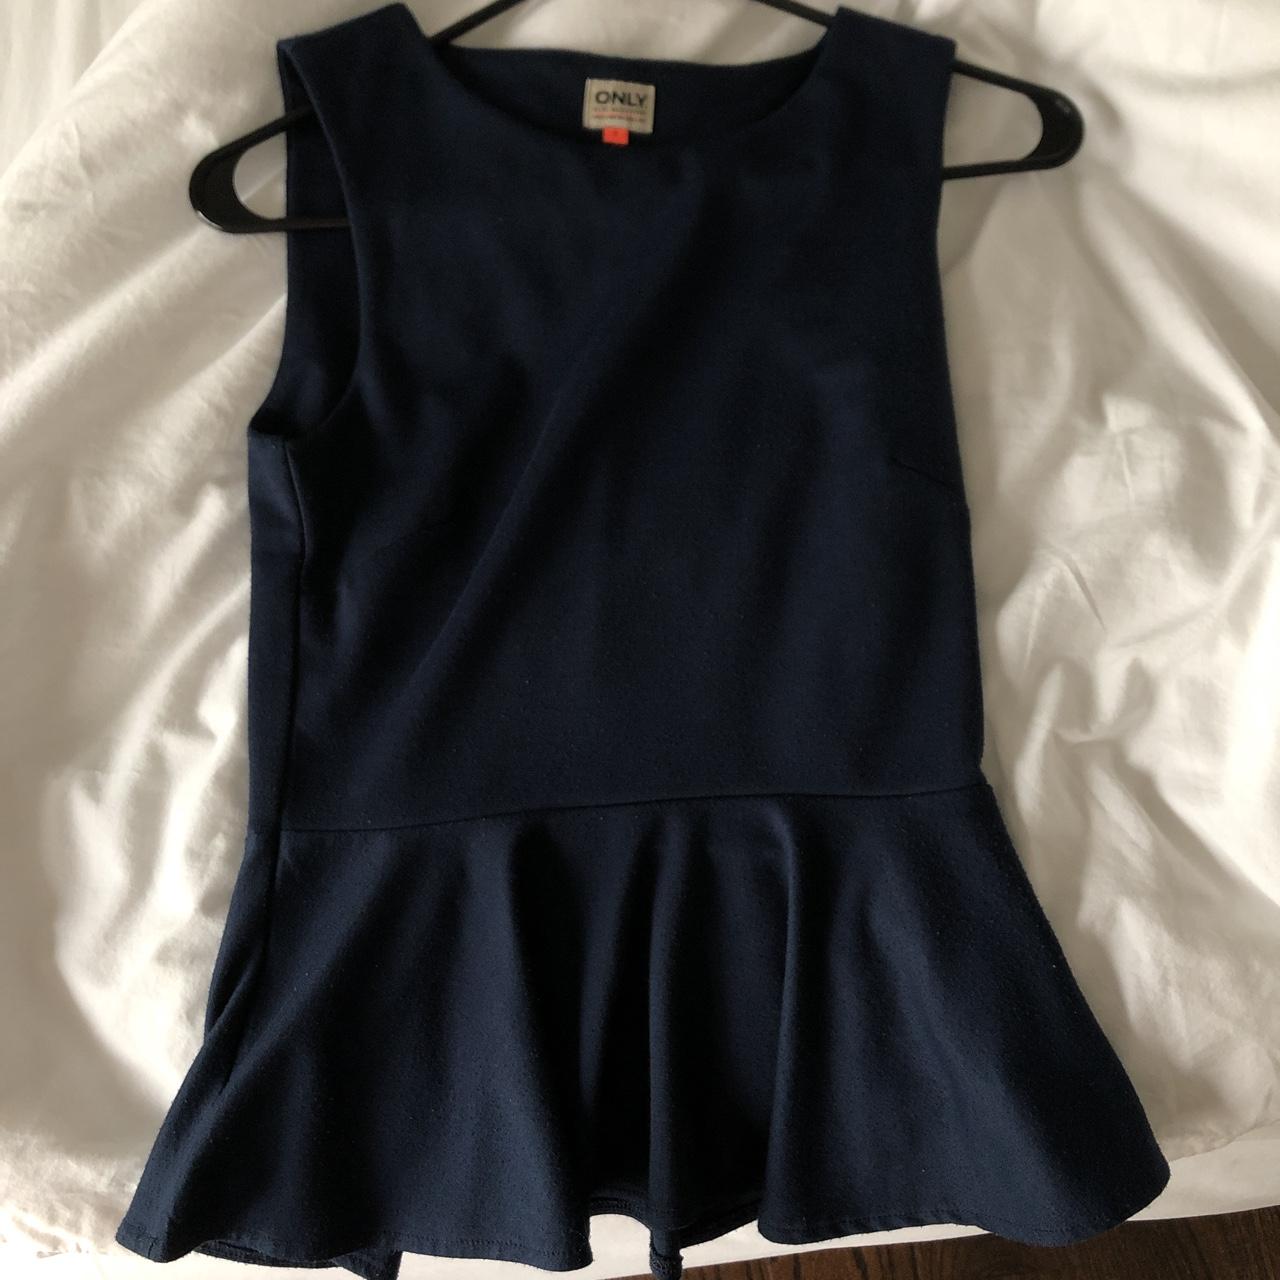 Navy blue peplum top from Only So cute and... - Depop